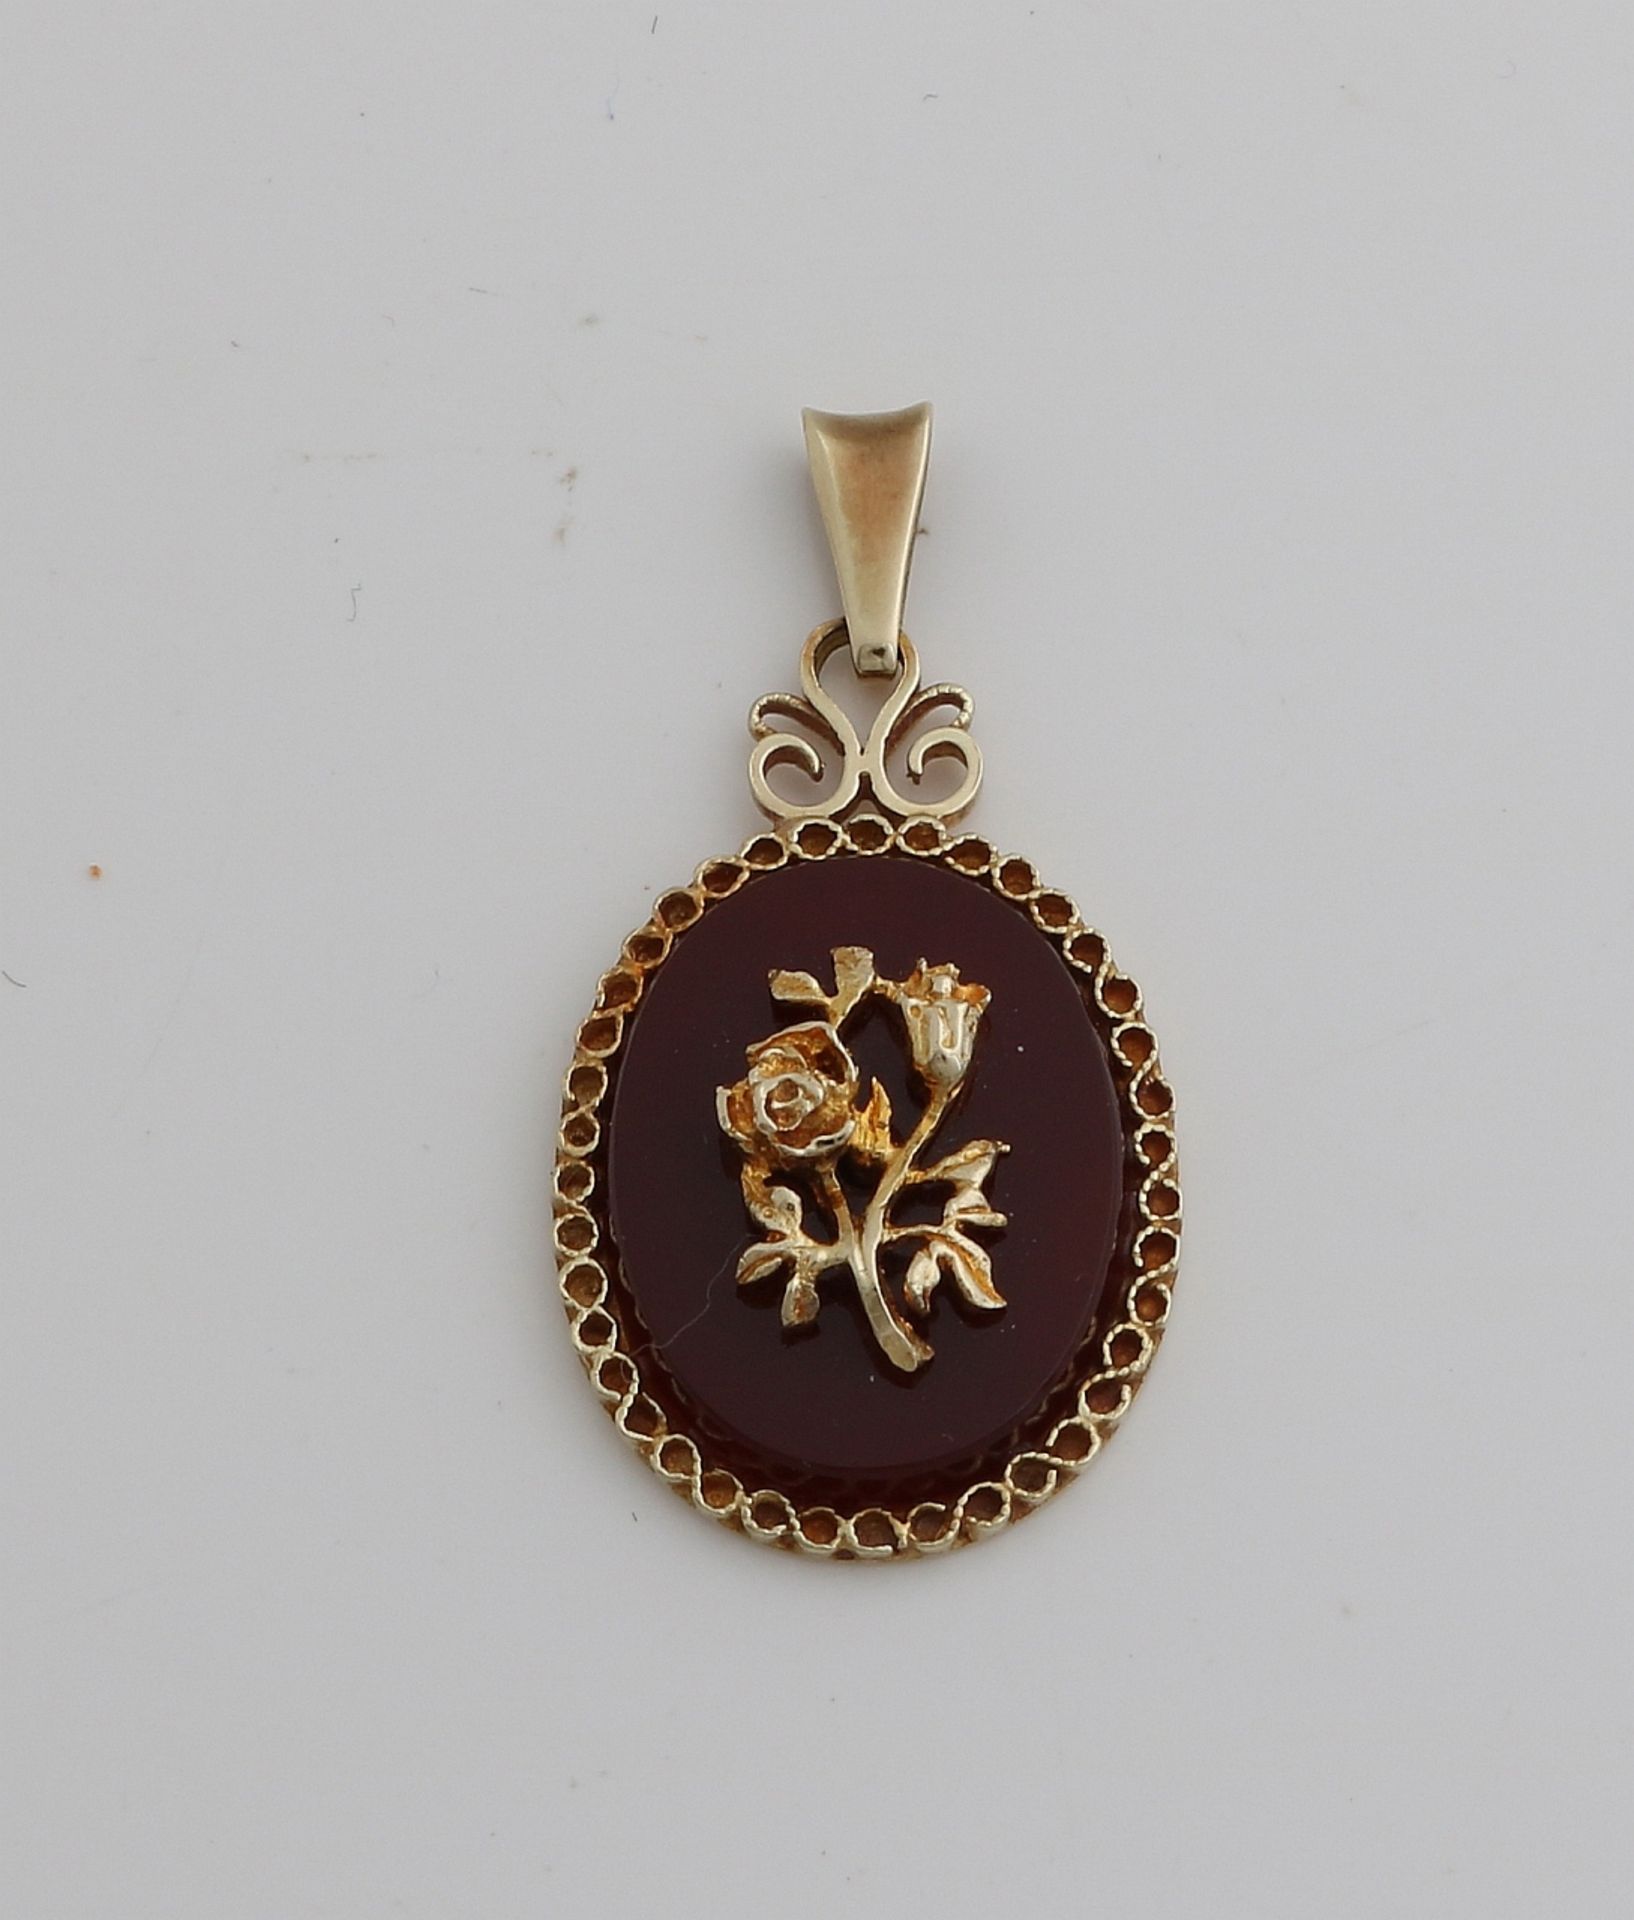 Gold pendant with carnelian